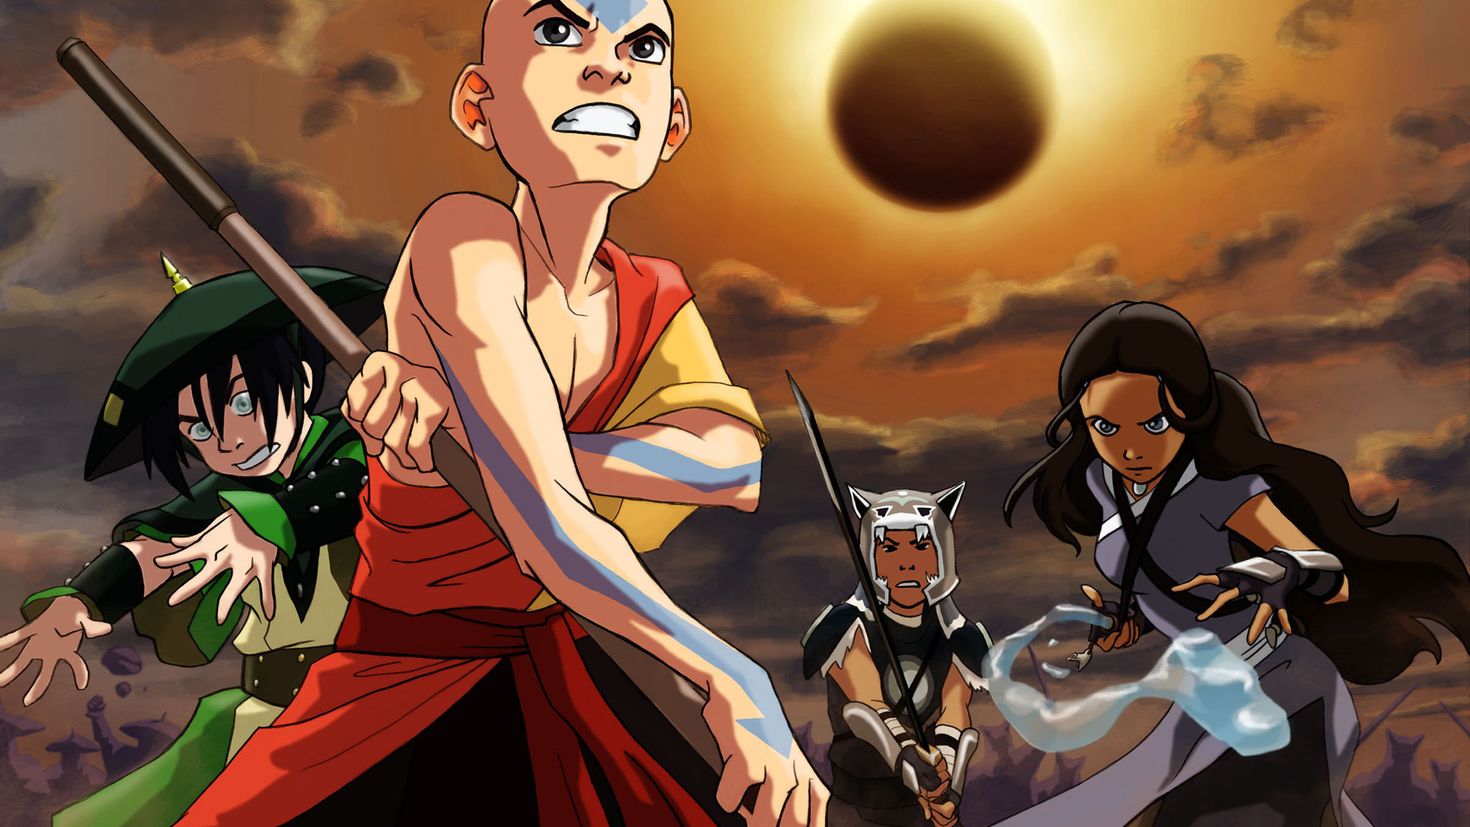 Avatar legend of aang english. Аватар аанг. Аватар the last Airbender.